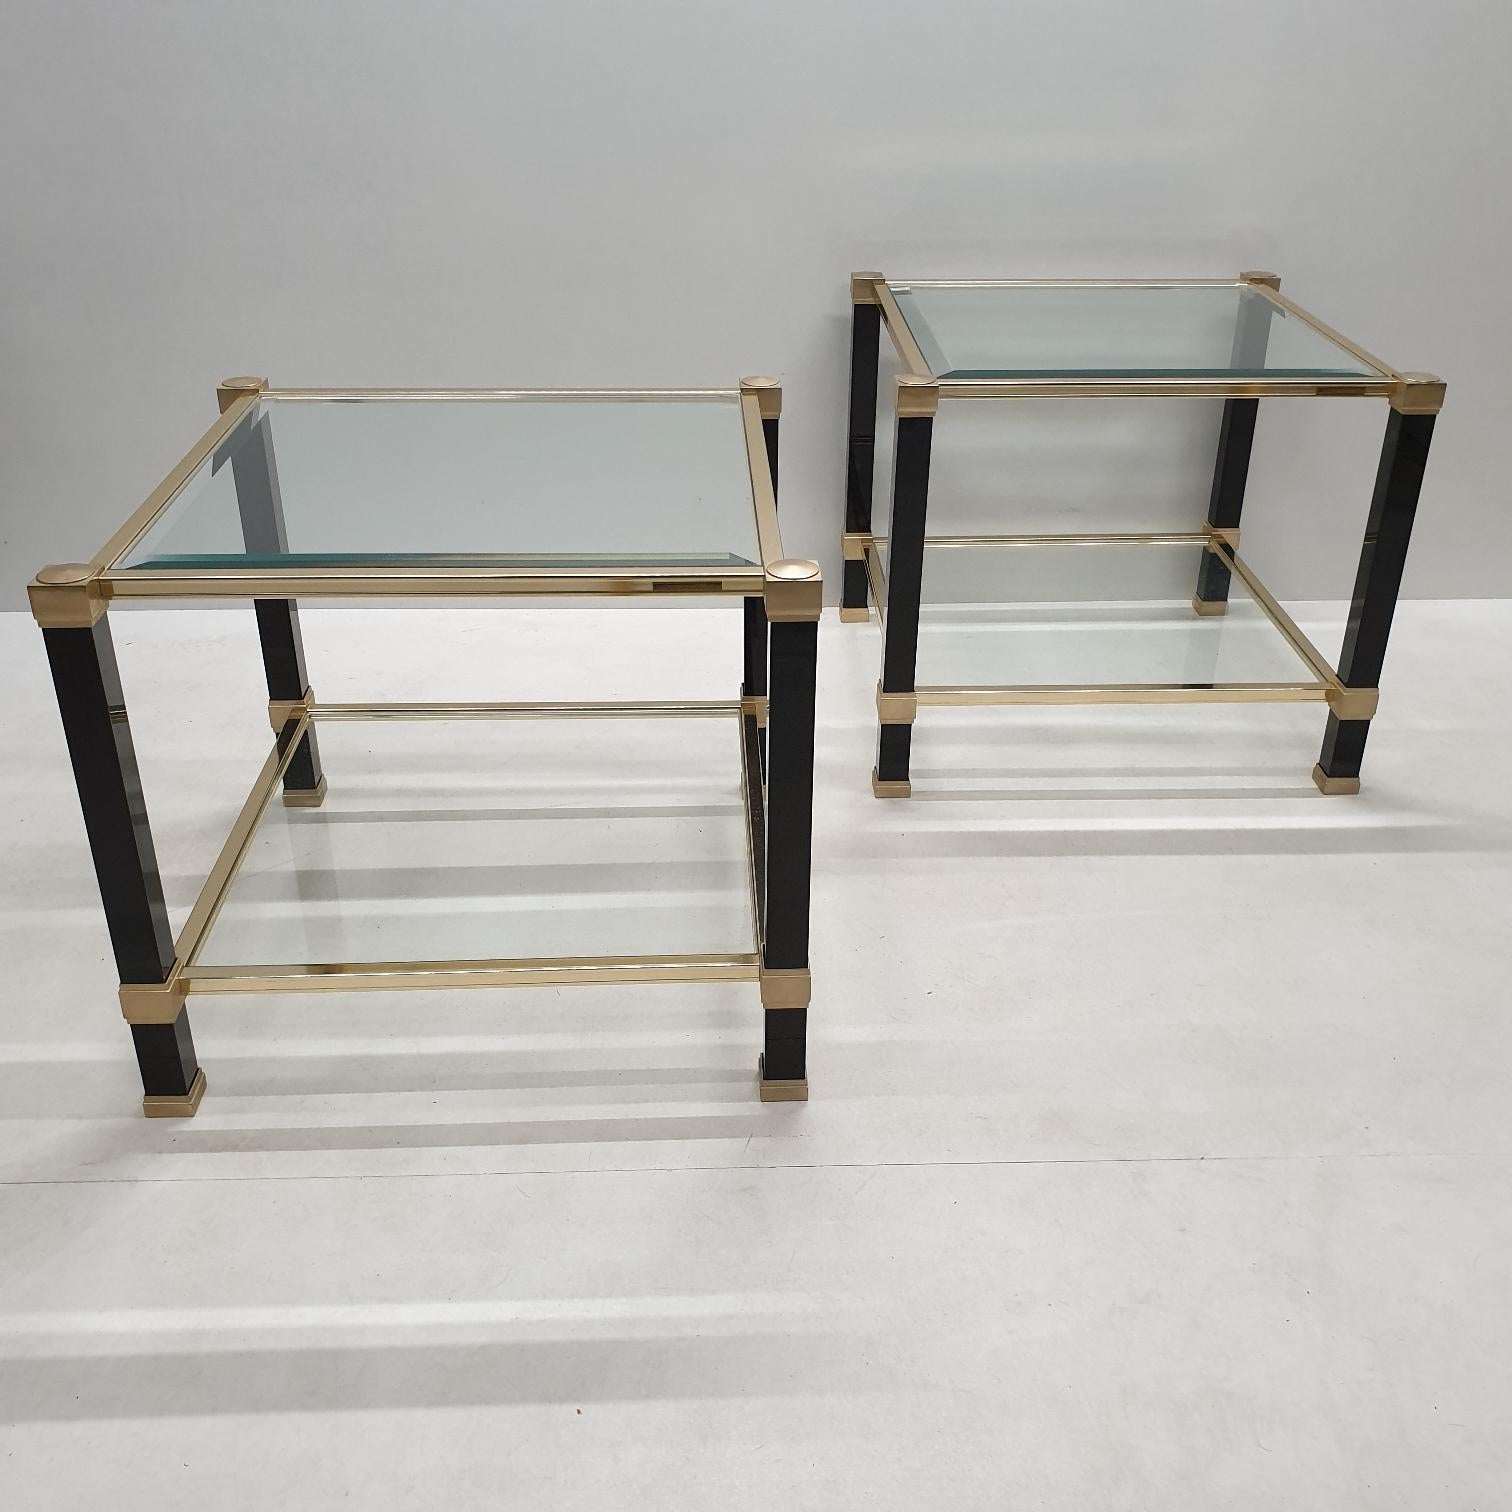 Faceted Pair of Brass 2-Tiers Square Site Tables by Pierre Vandel, 1980s, 1 Set of 2 For Sale